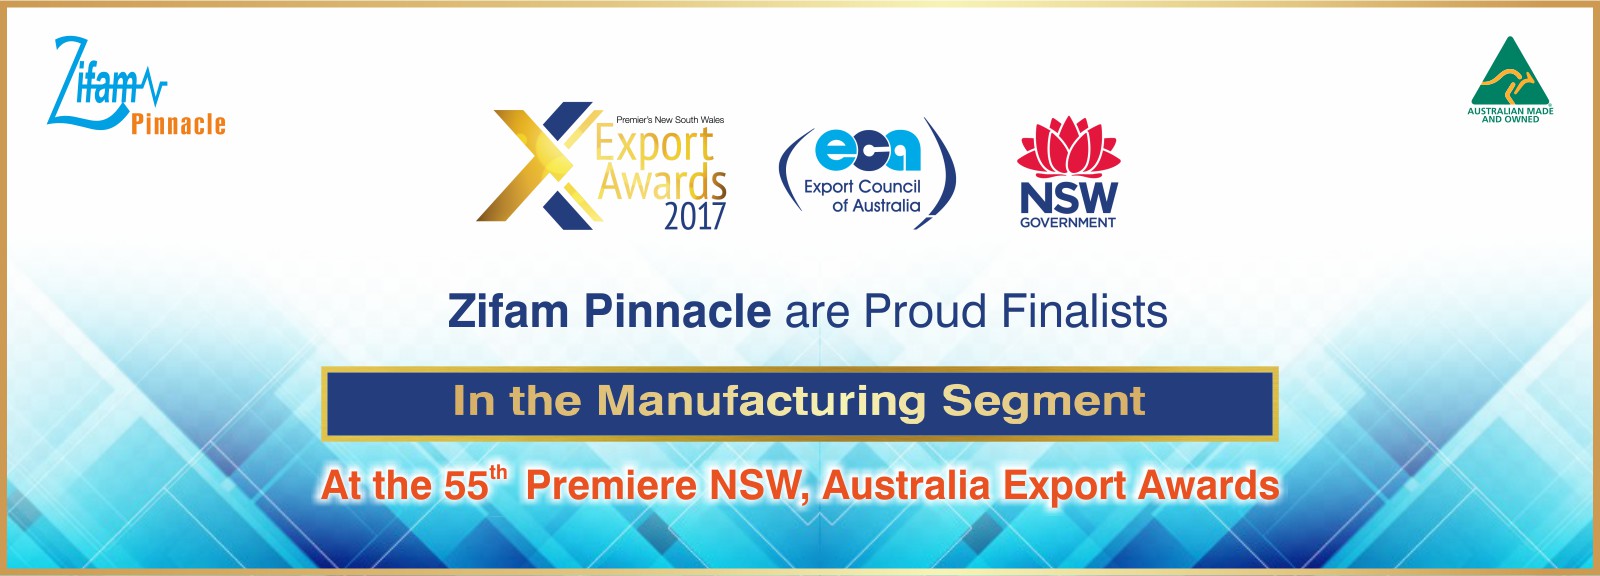 NSW Export Awards Banner